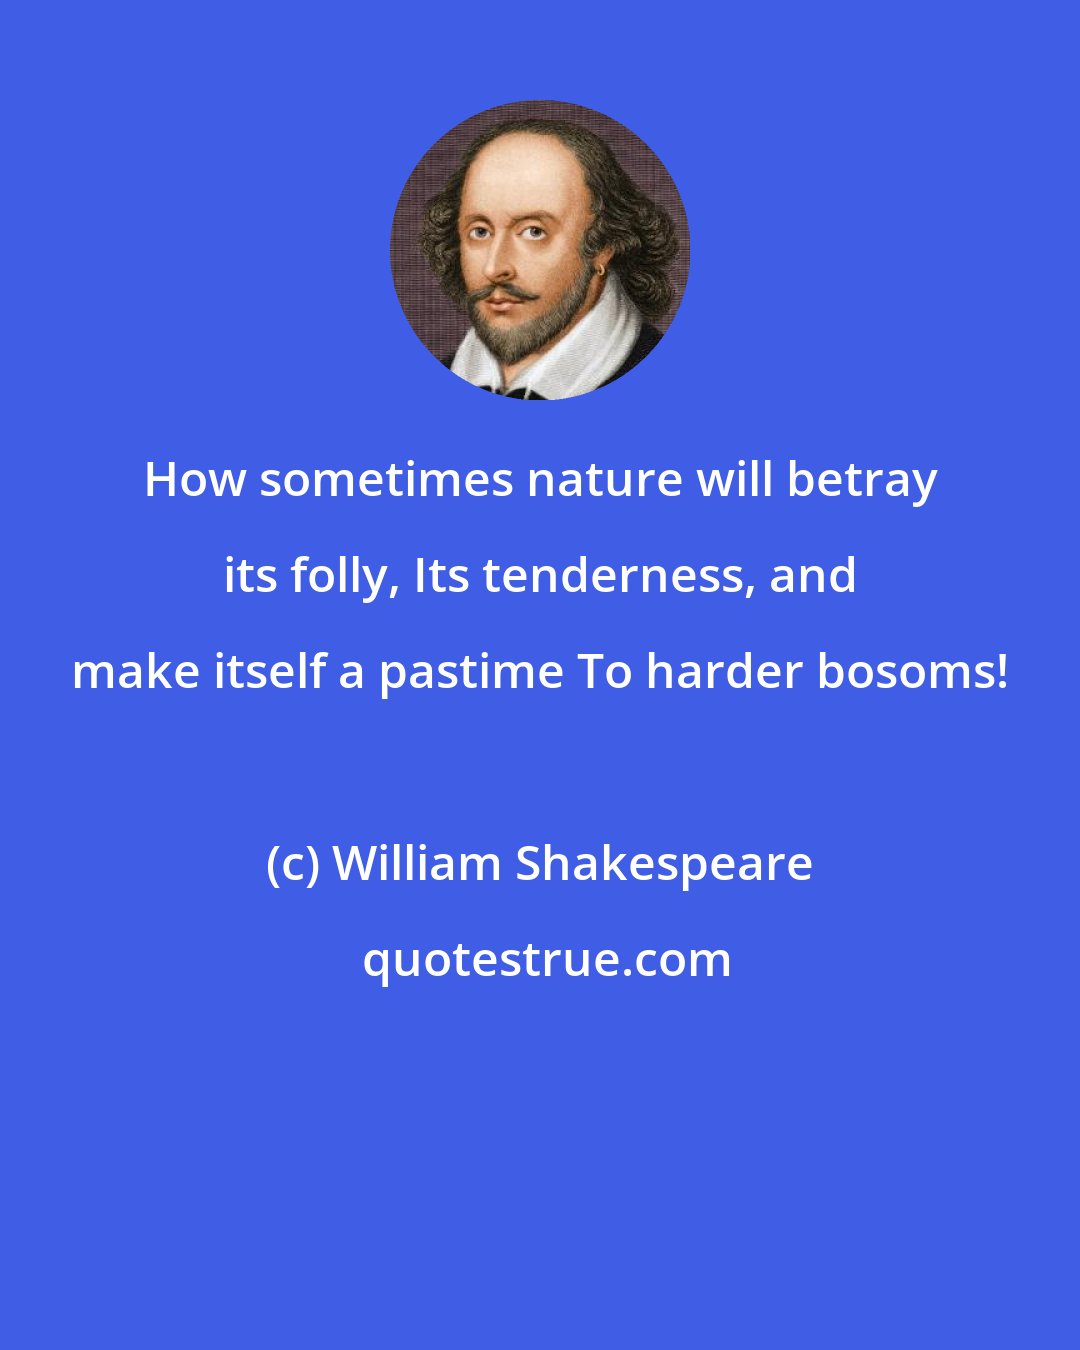 William Shakespeare: How sometimes nature will betray its folly, Its tenderness, and make itself a pastime To harder bosoms!